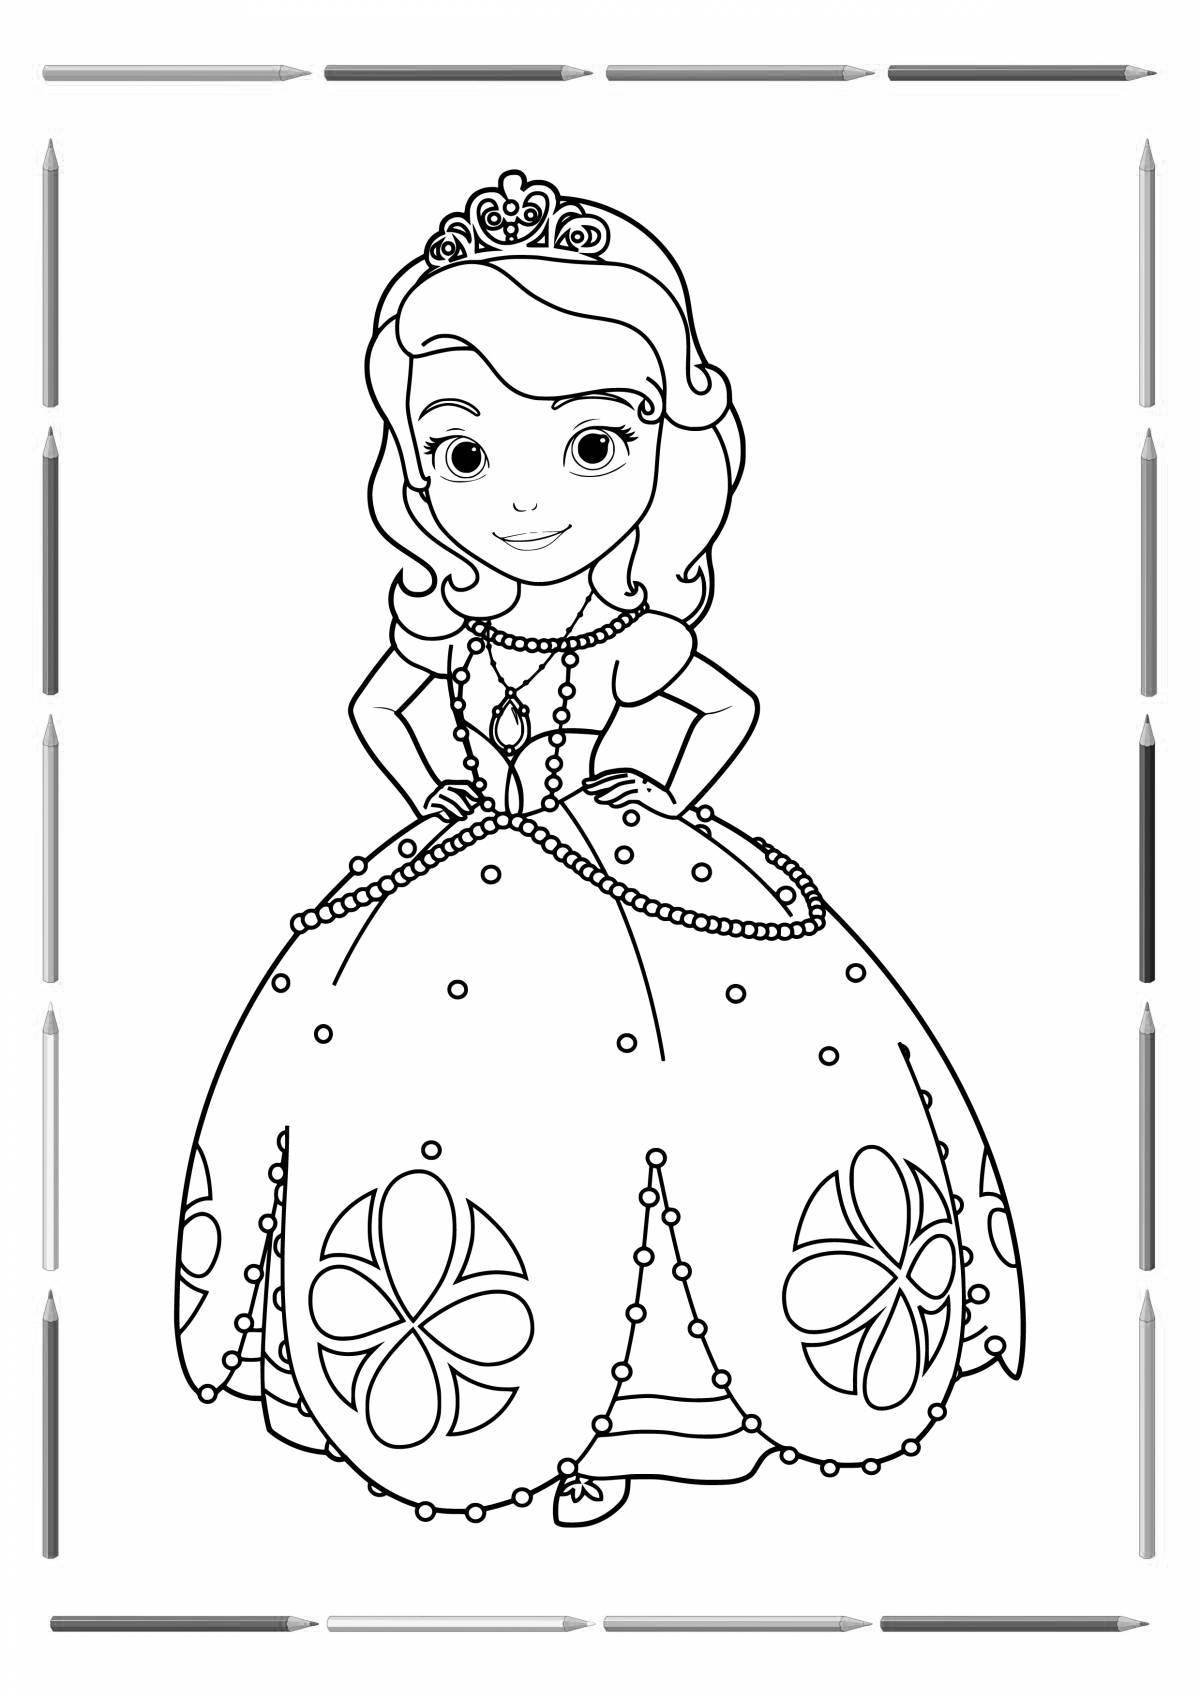 Princess coloring pages for girls 4 years old